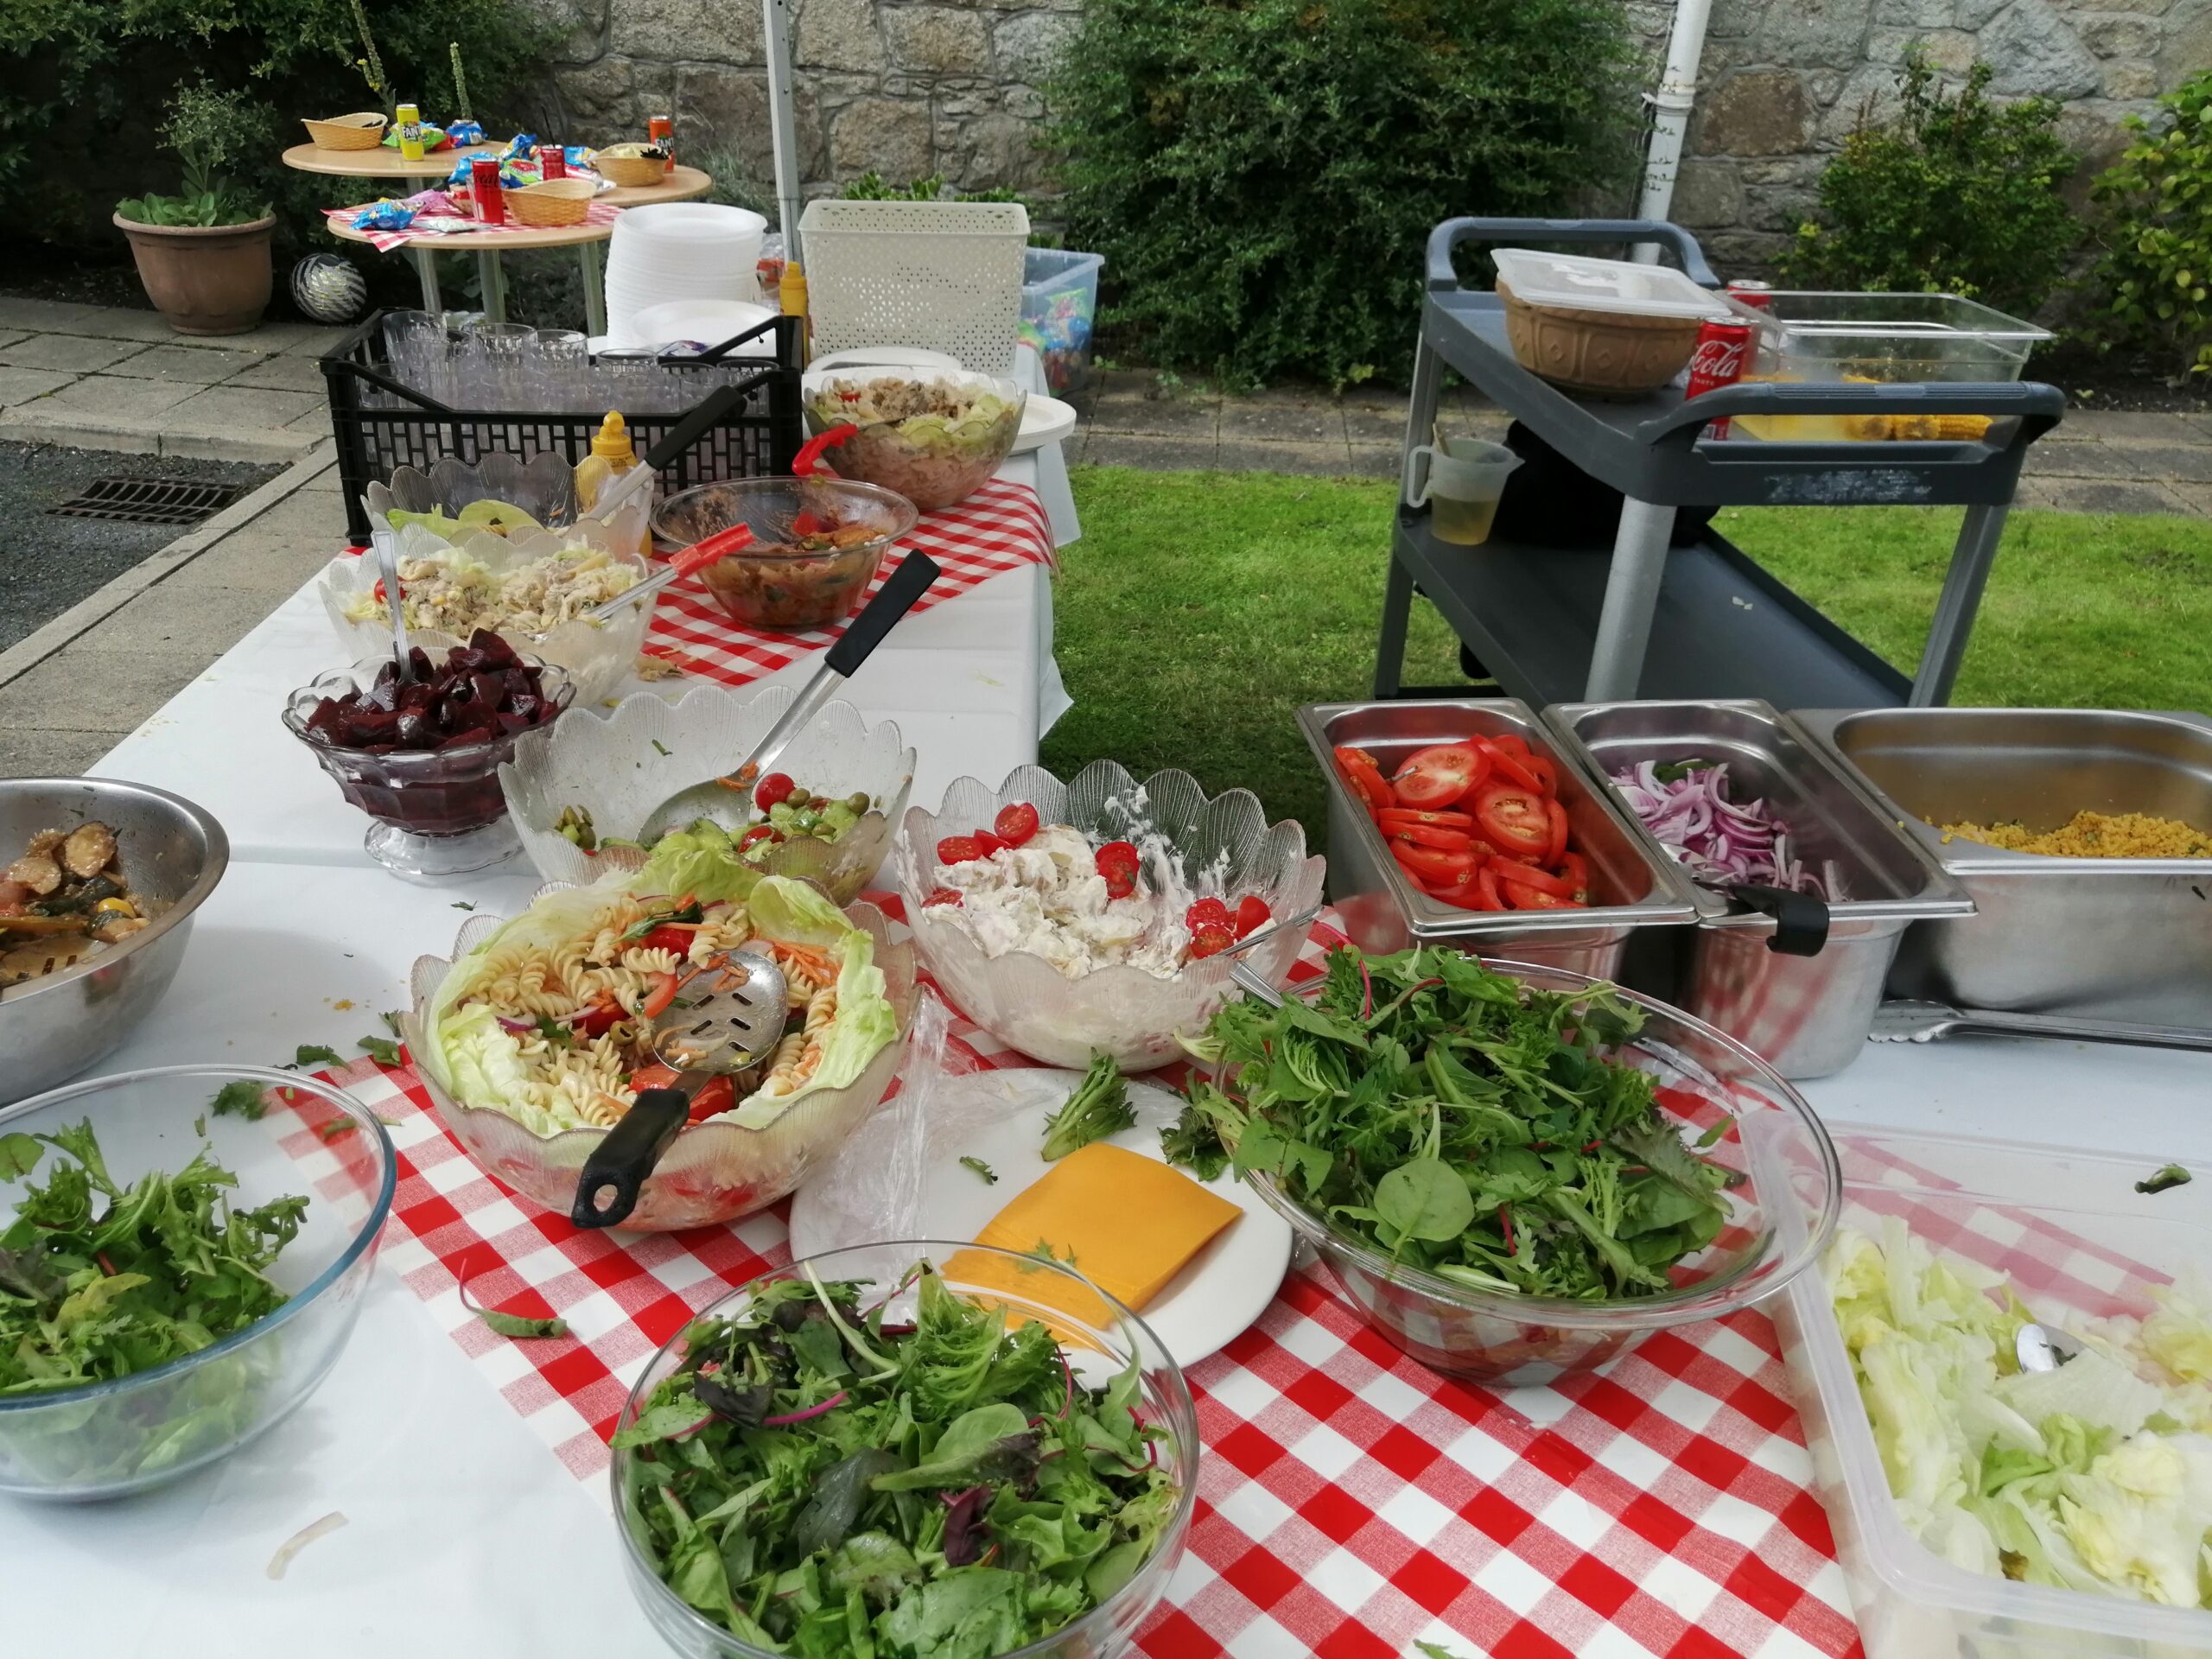 Delicious food to celebrate Mount Tabor's 25th